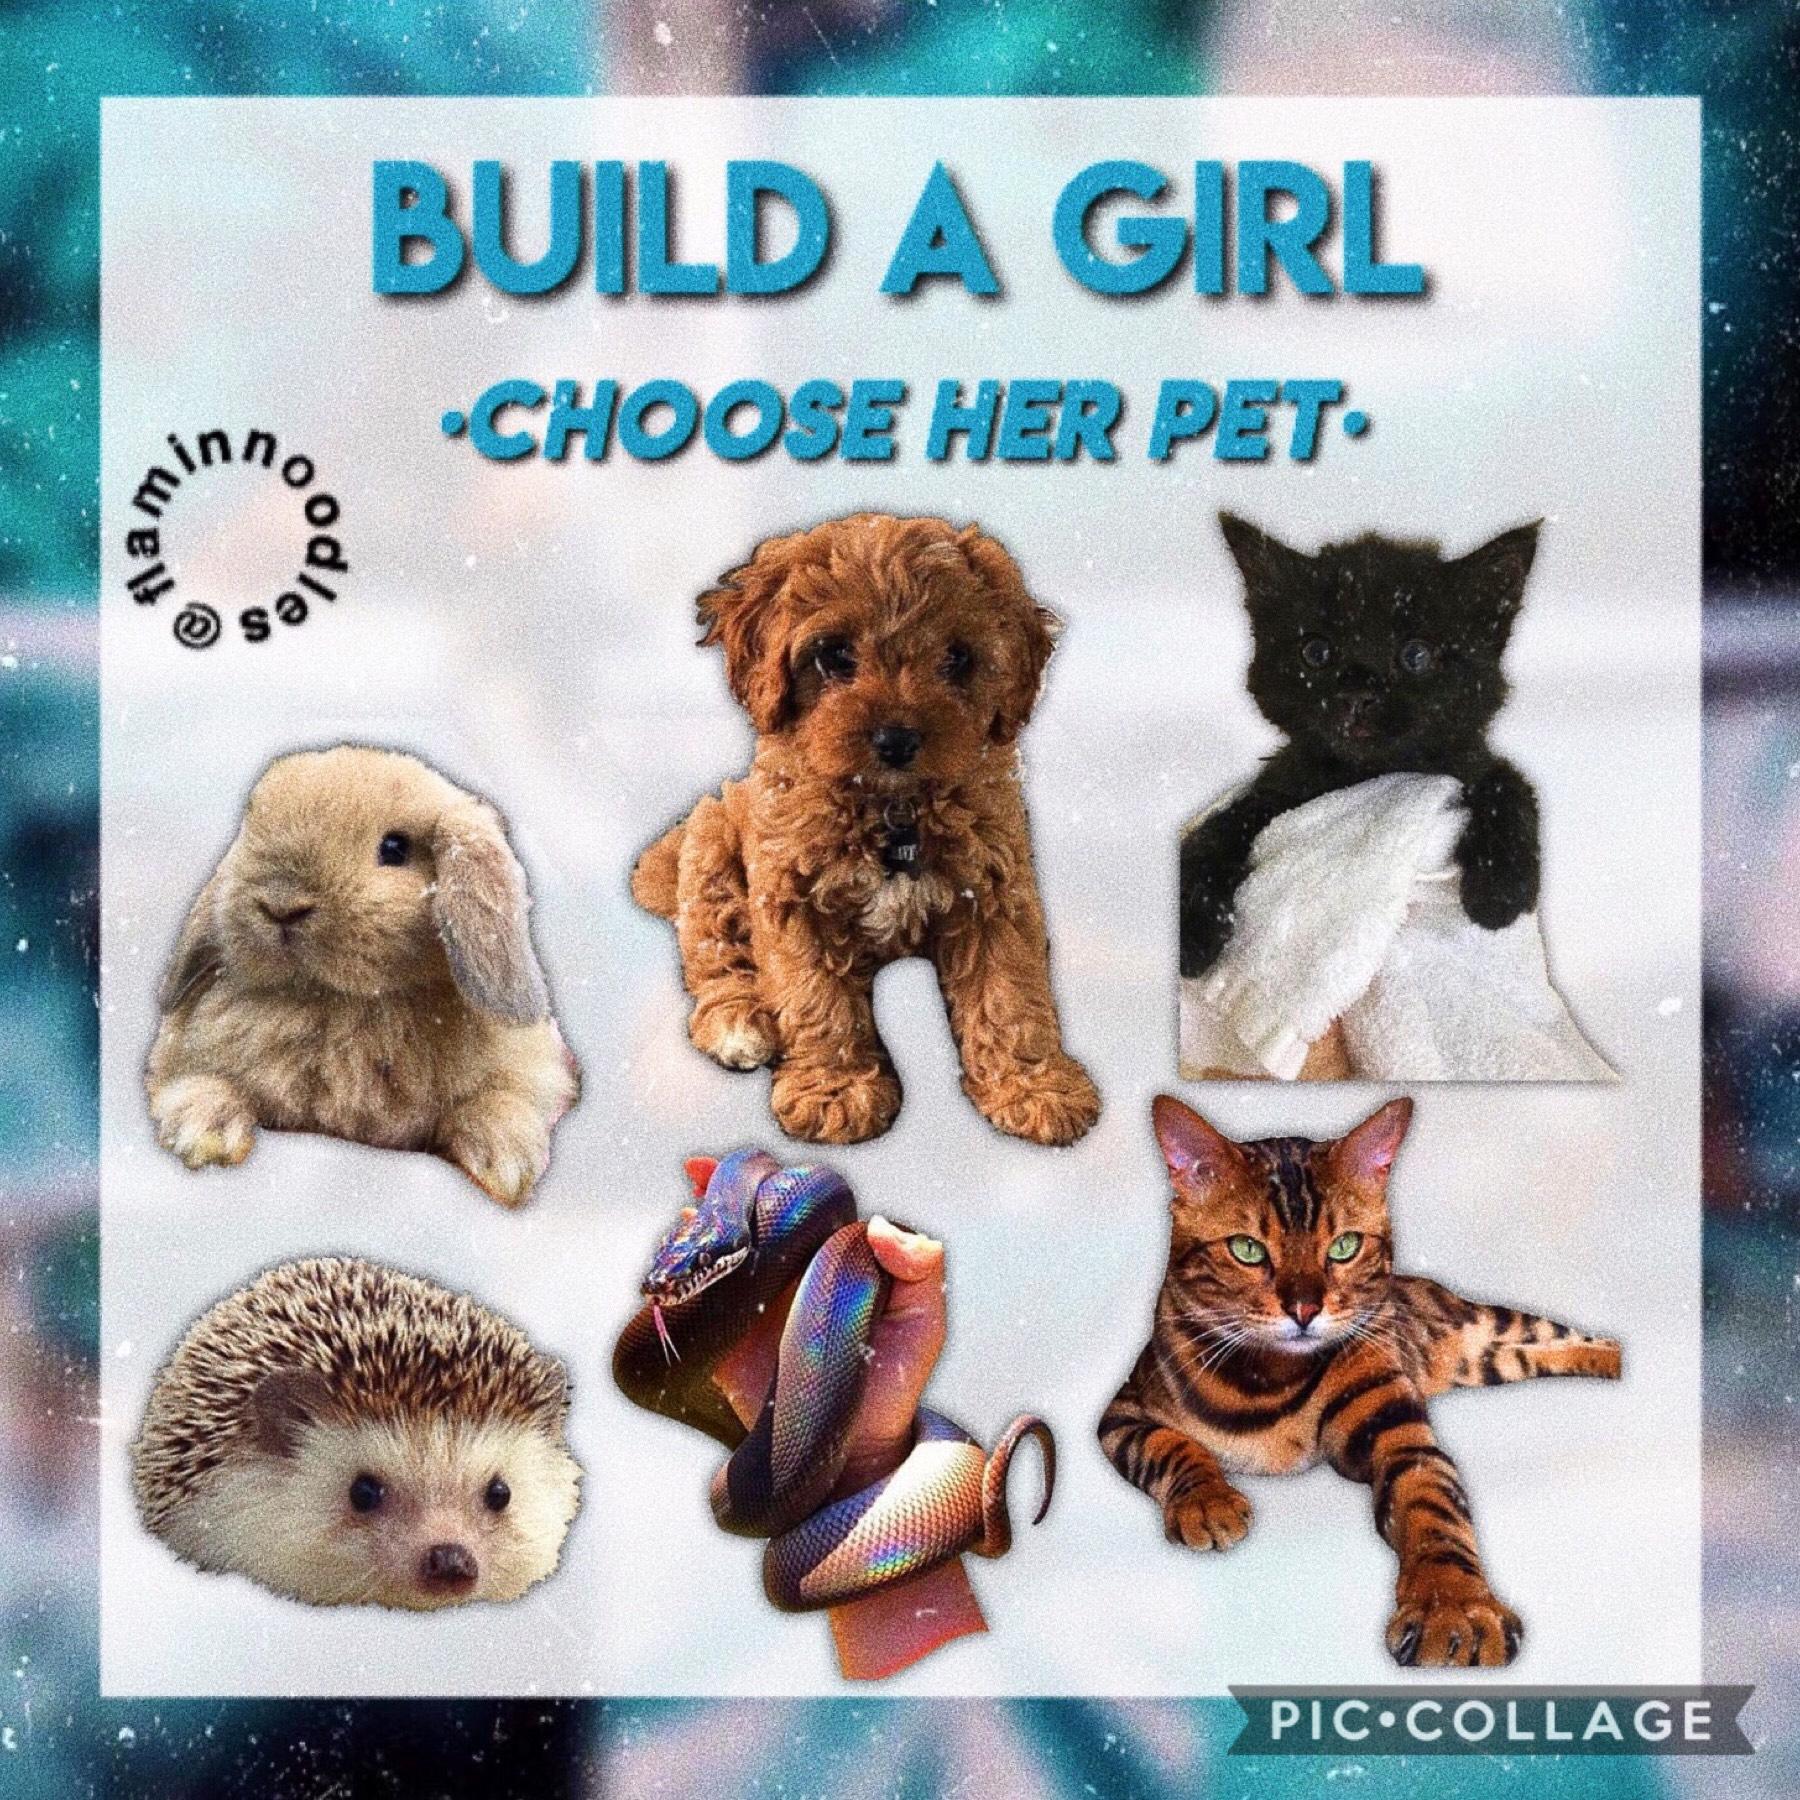 ✨Tap✨ 
This is THE LAST part (part 3) of this little theme I was finishing up aka Build A Girl - anyways idk if I’ll be posting next week but stay tuned!
QOTD: what animal would you choose? 